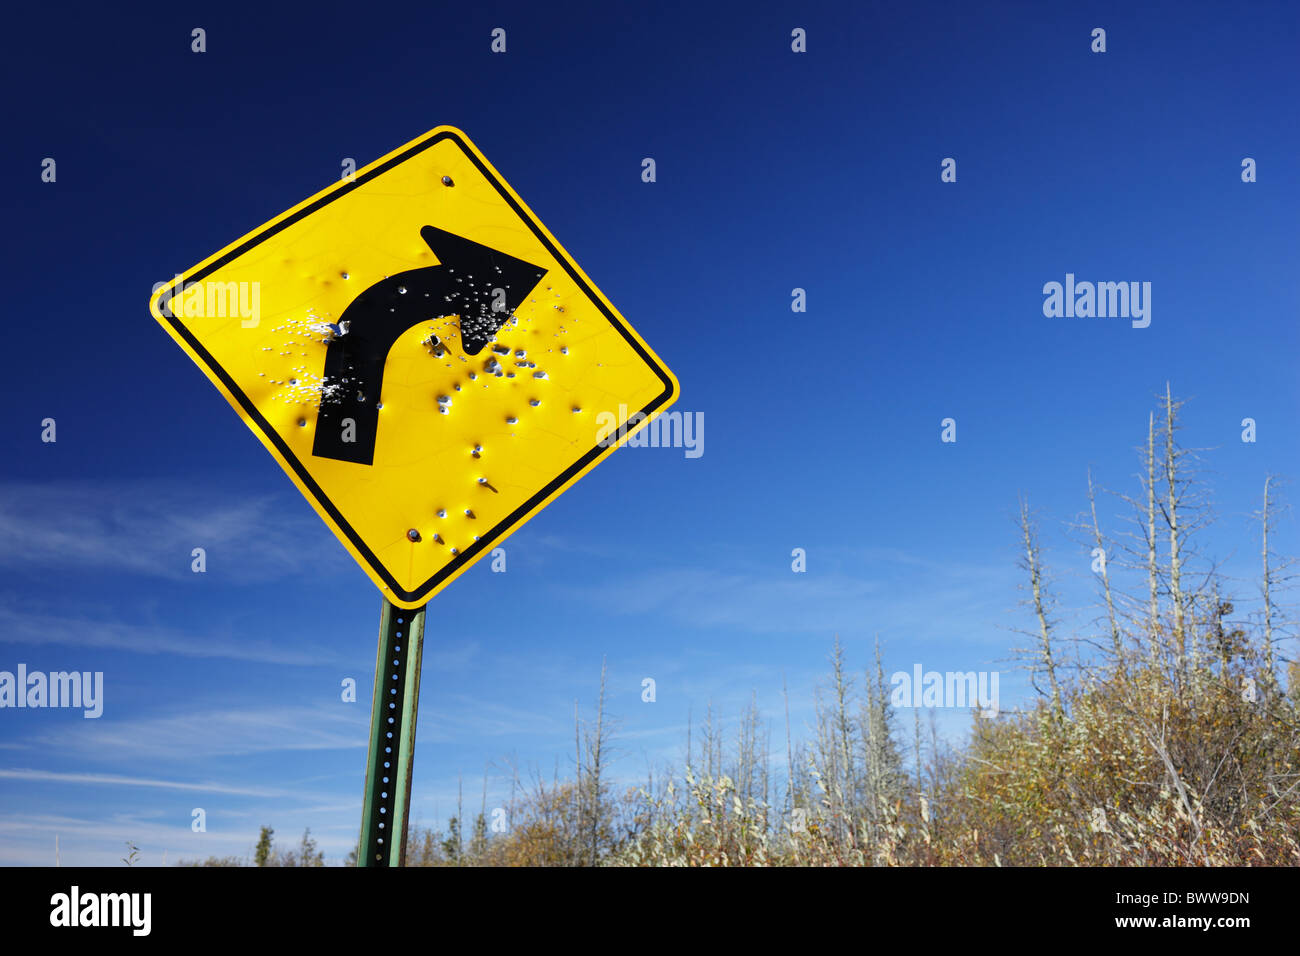 A shotgun blasted curve sign in a rural setting. Stock Photo